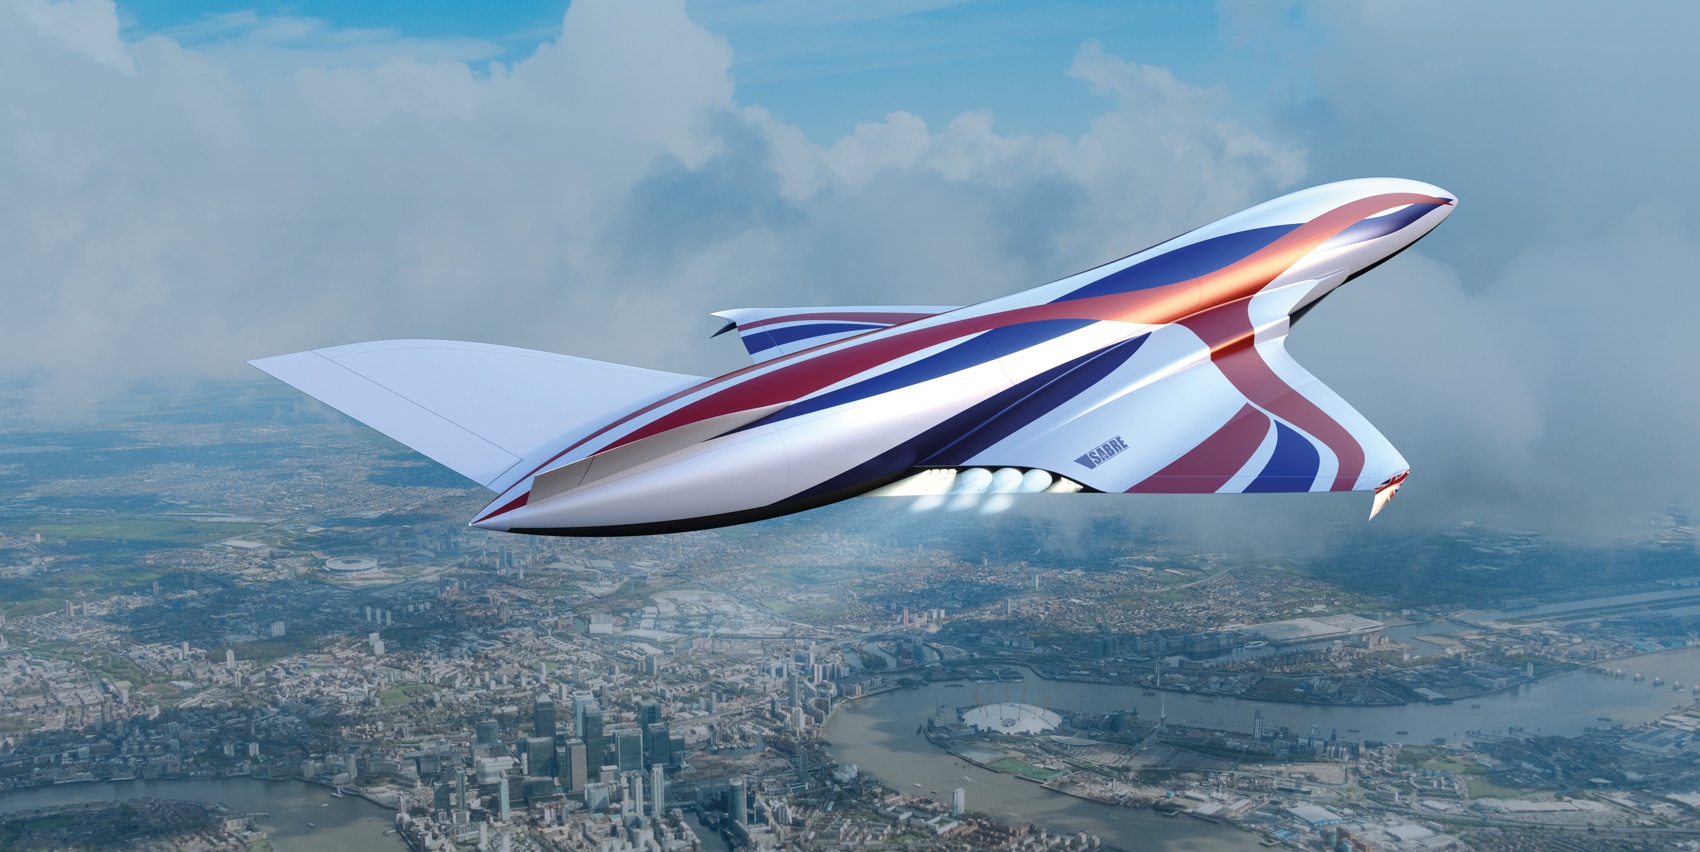 Reaction Engines aircraft made by BAE-Systems is flying, adorned with UK Union Jack flag